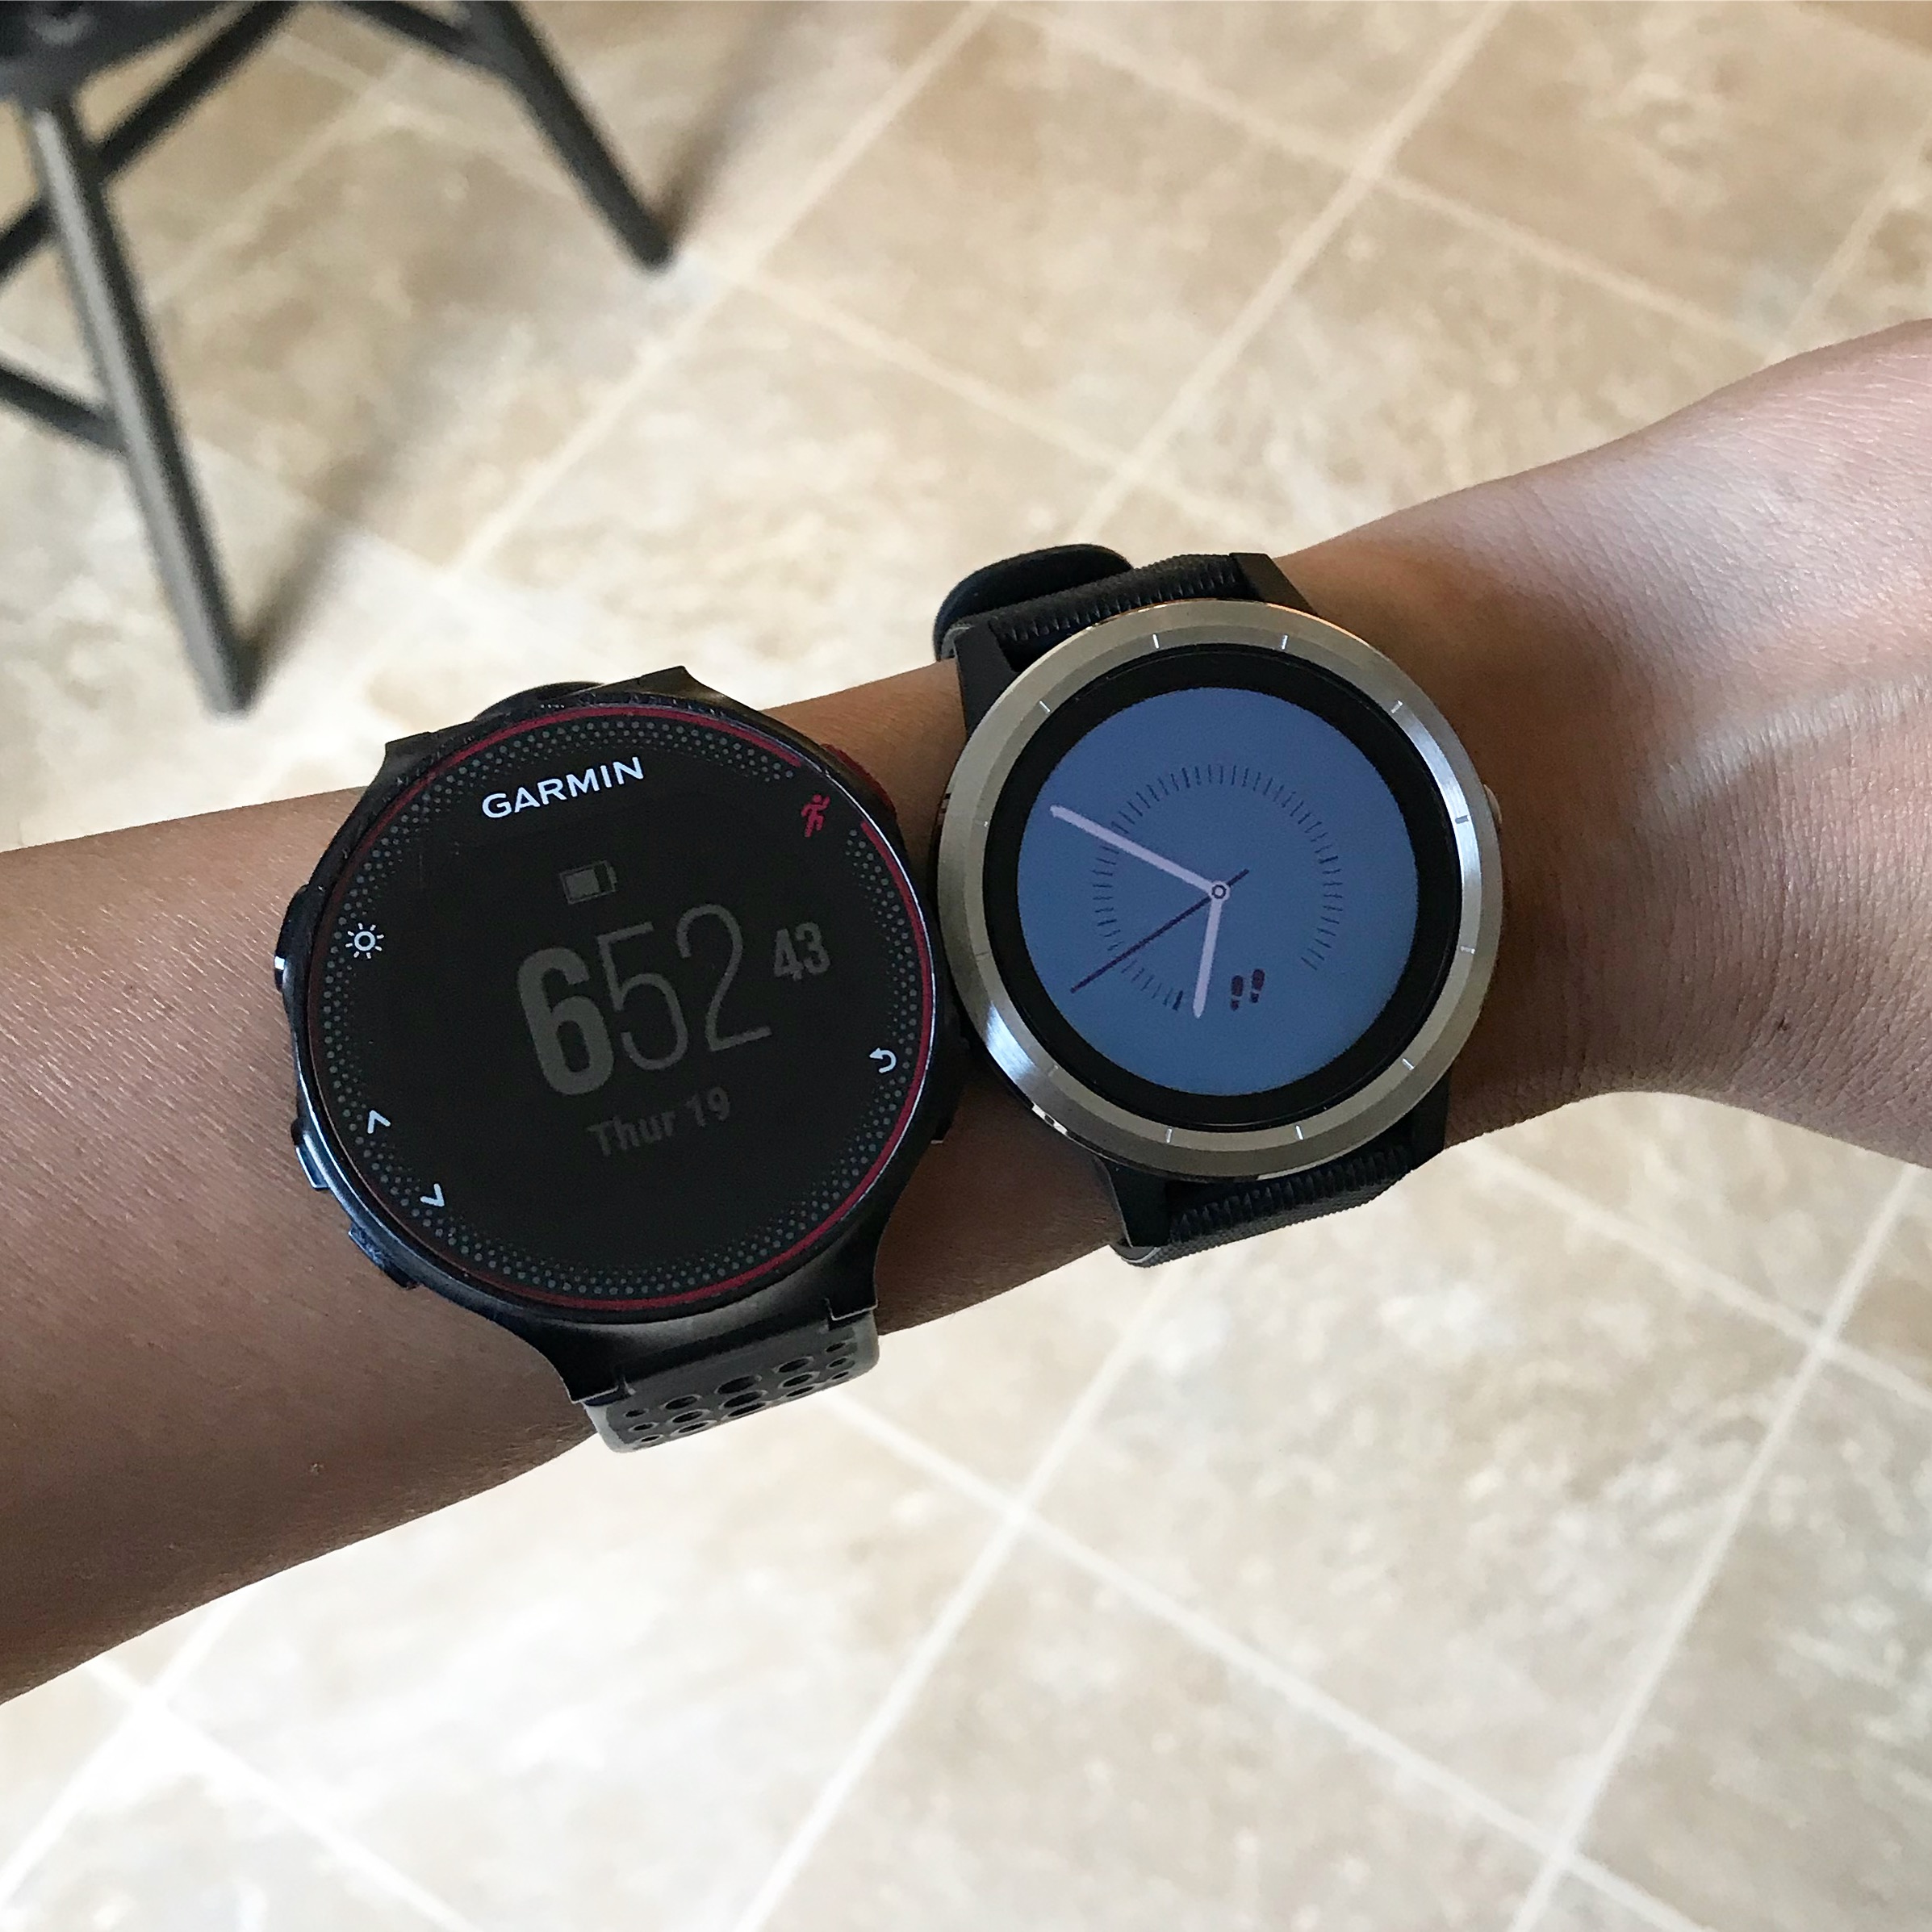 difference between garmin forerunner 235 and vivoactive 3